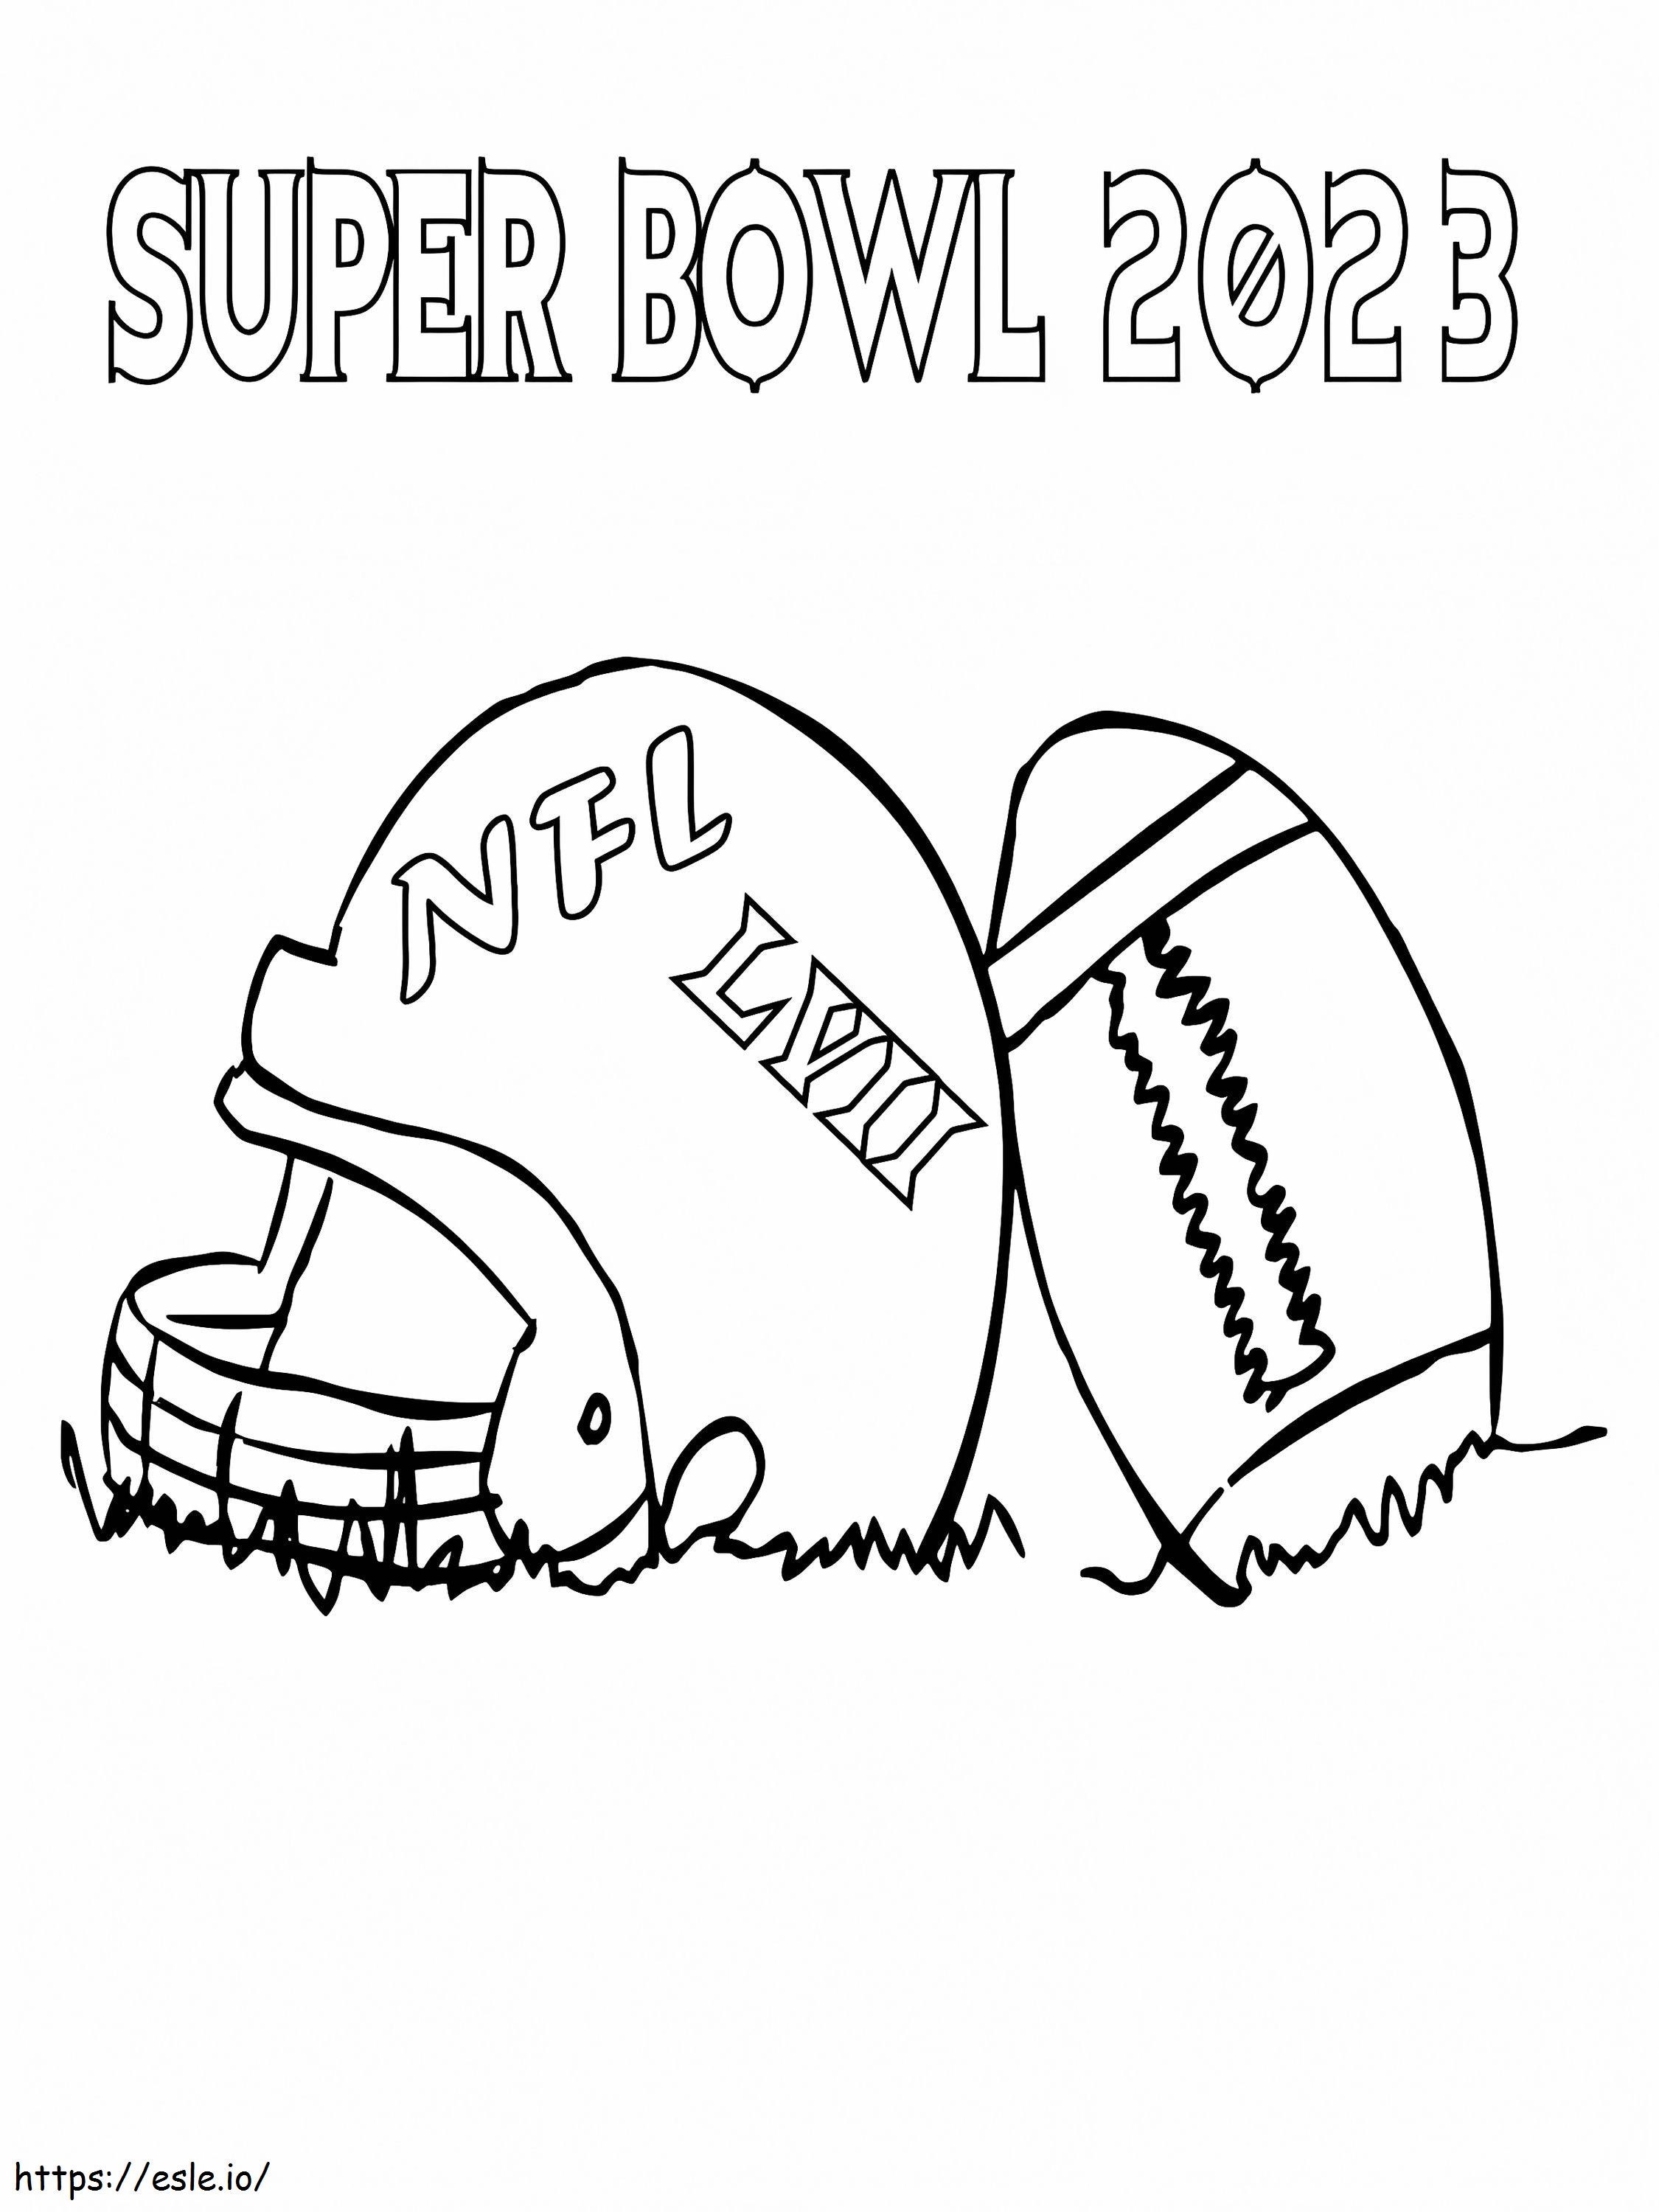 Nfl helmet and ball coloring page